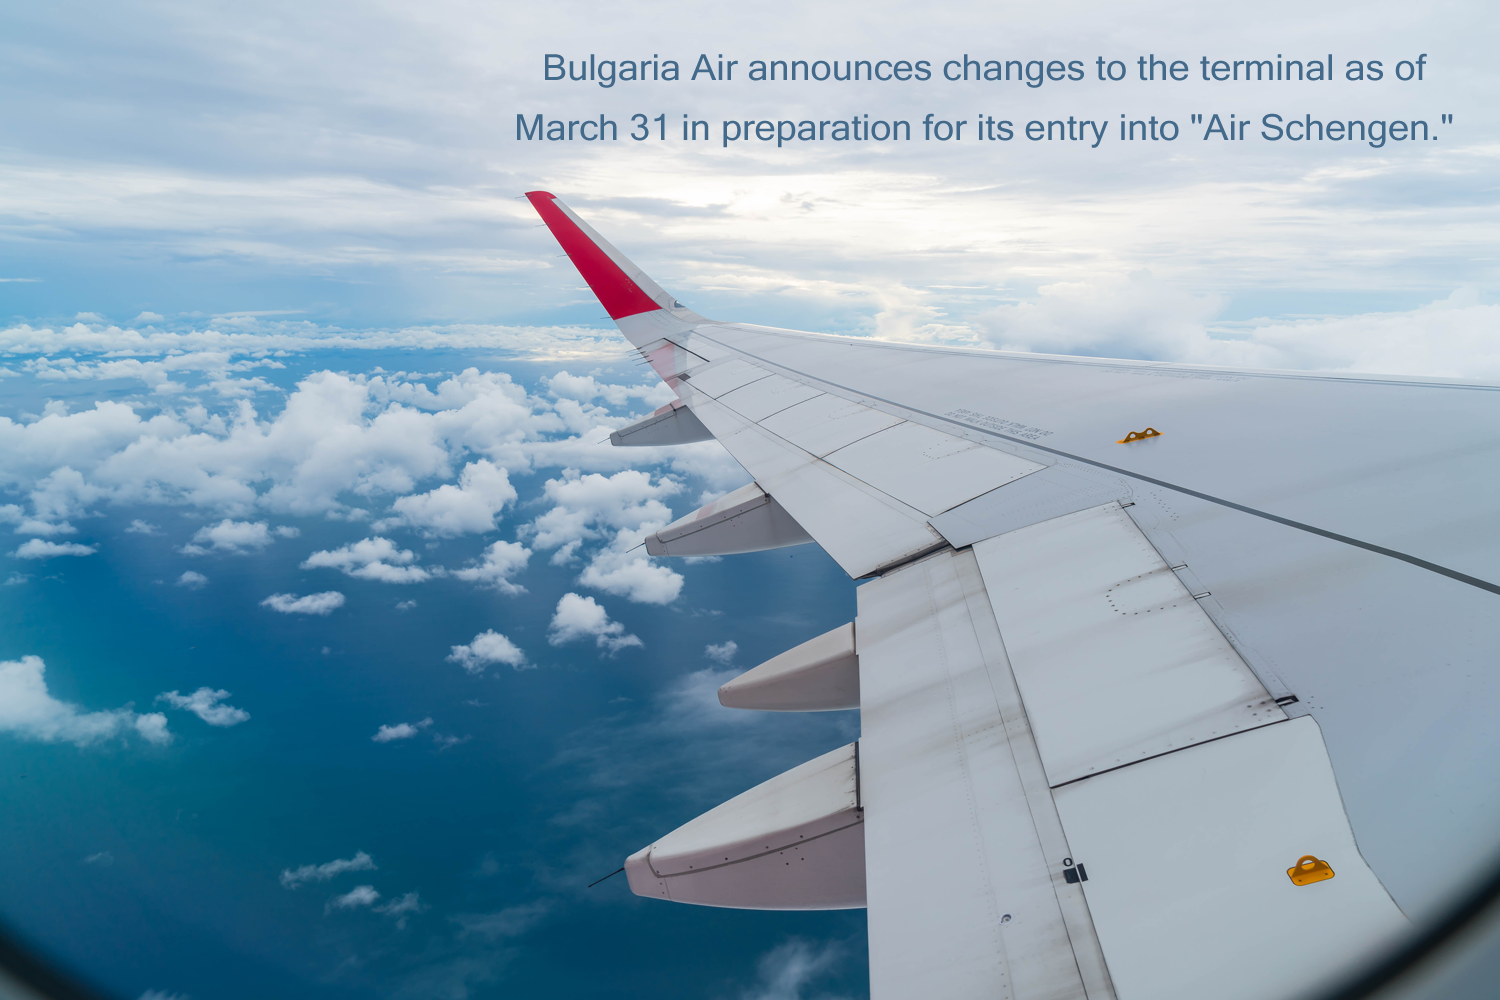 Bulgaria Air announces changes to the terminal as of March 31 in preparation for its entry into 